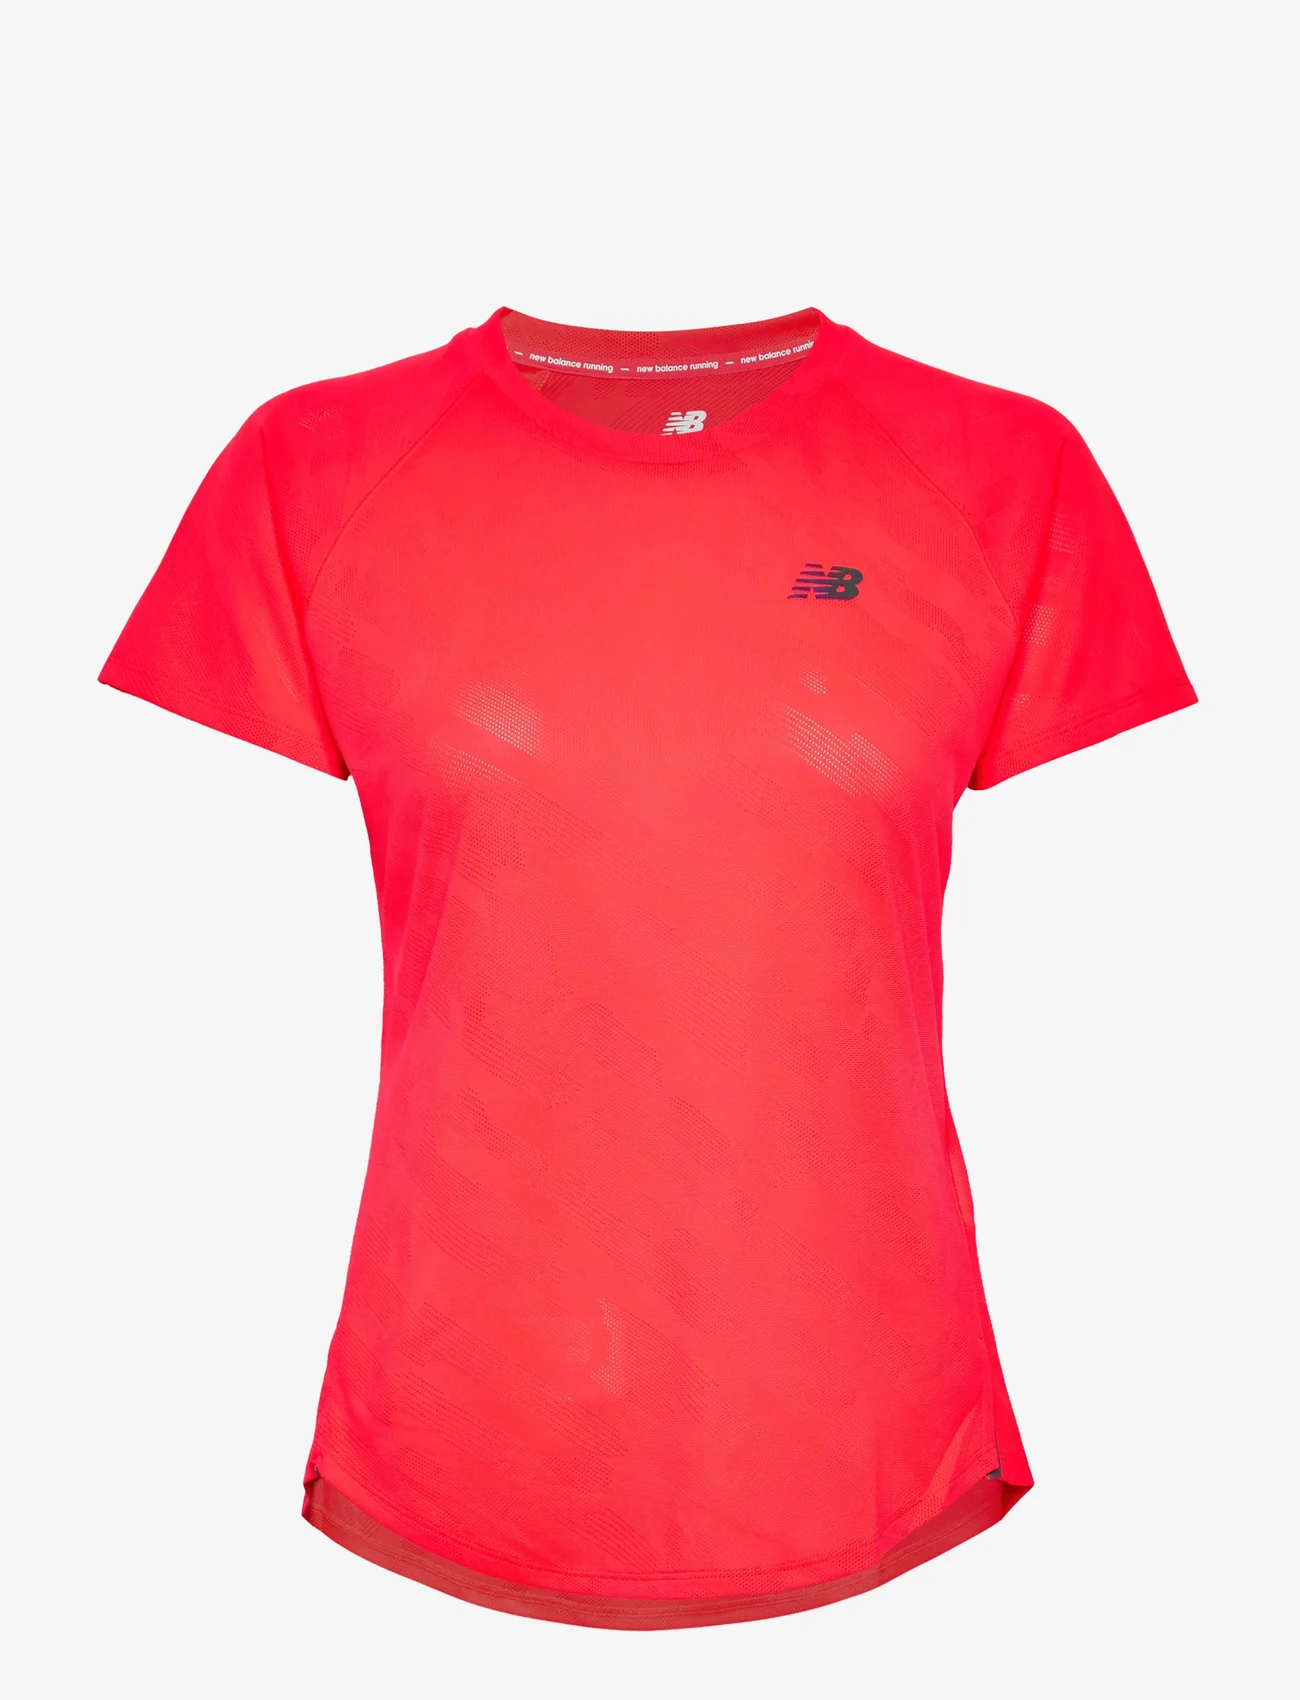 New Balance - Q Speed Jacquard Short Sleeve - t-shirts & tops - electric red - 0